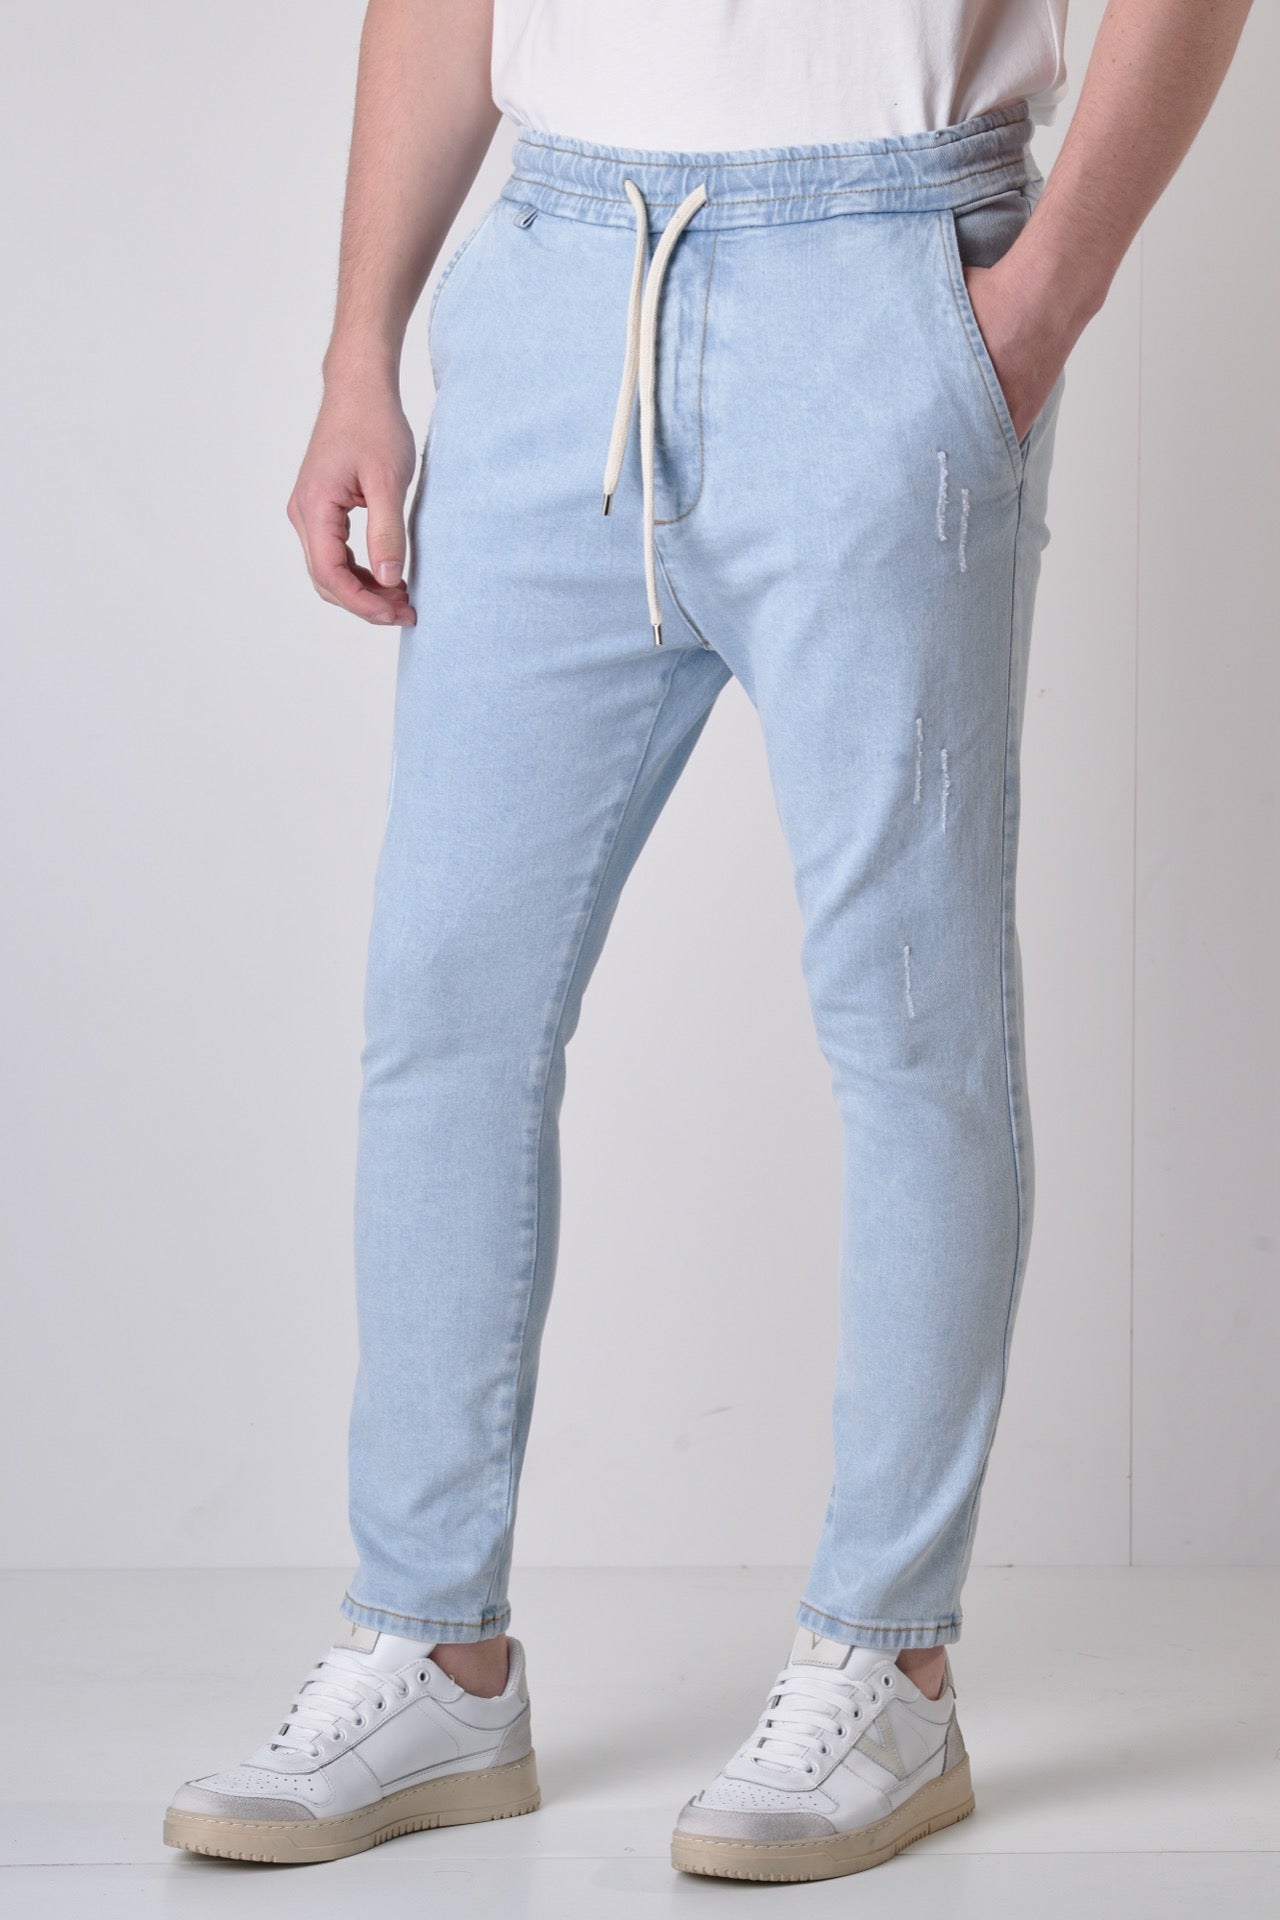 ALICANTE - Light blue drill trousers with elastic